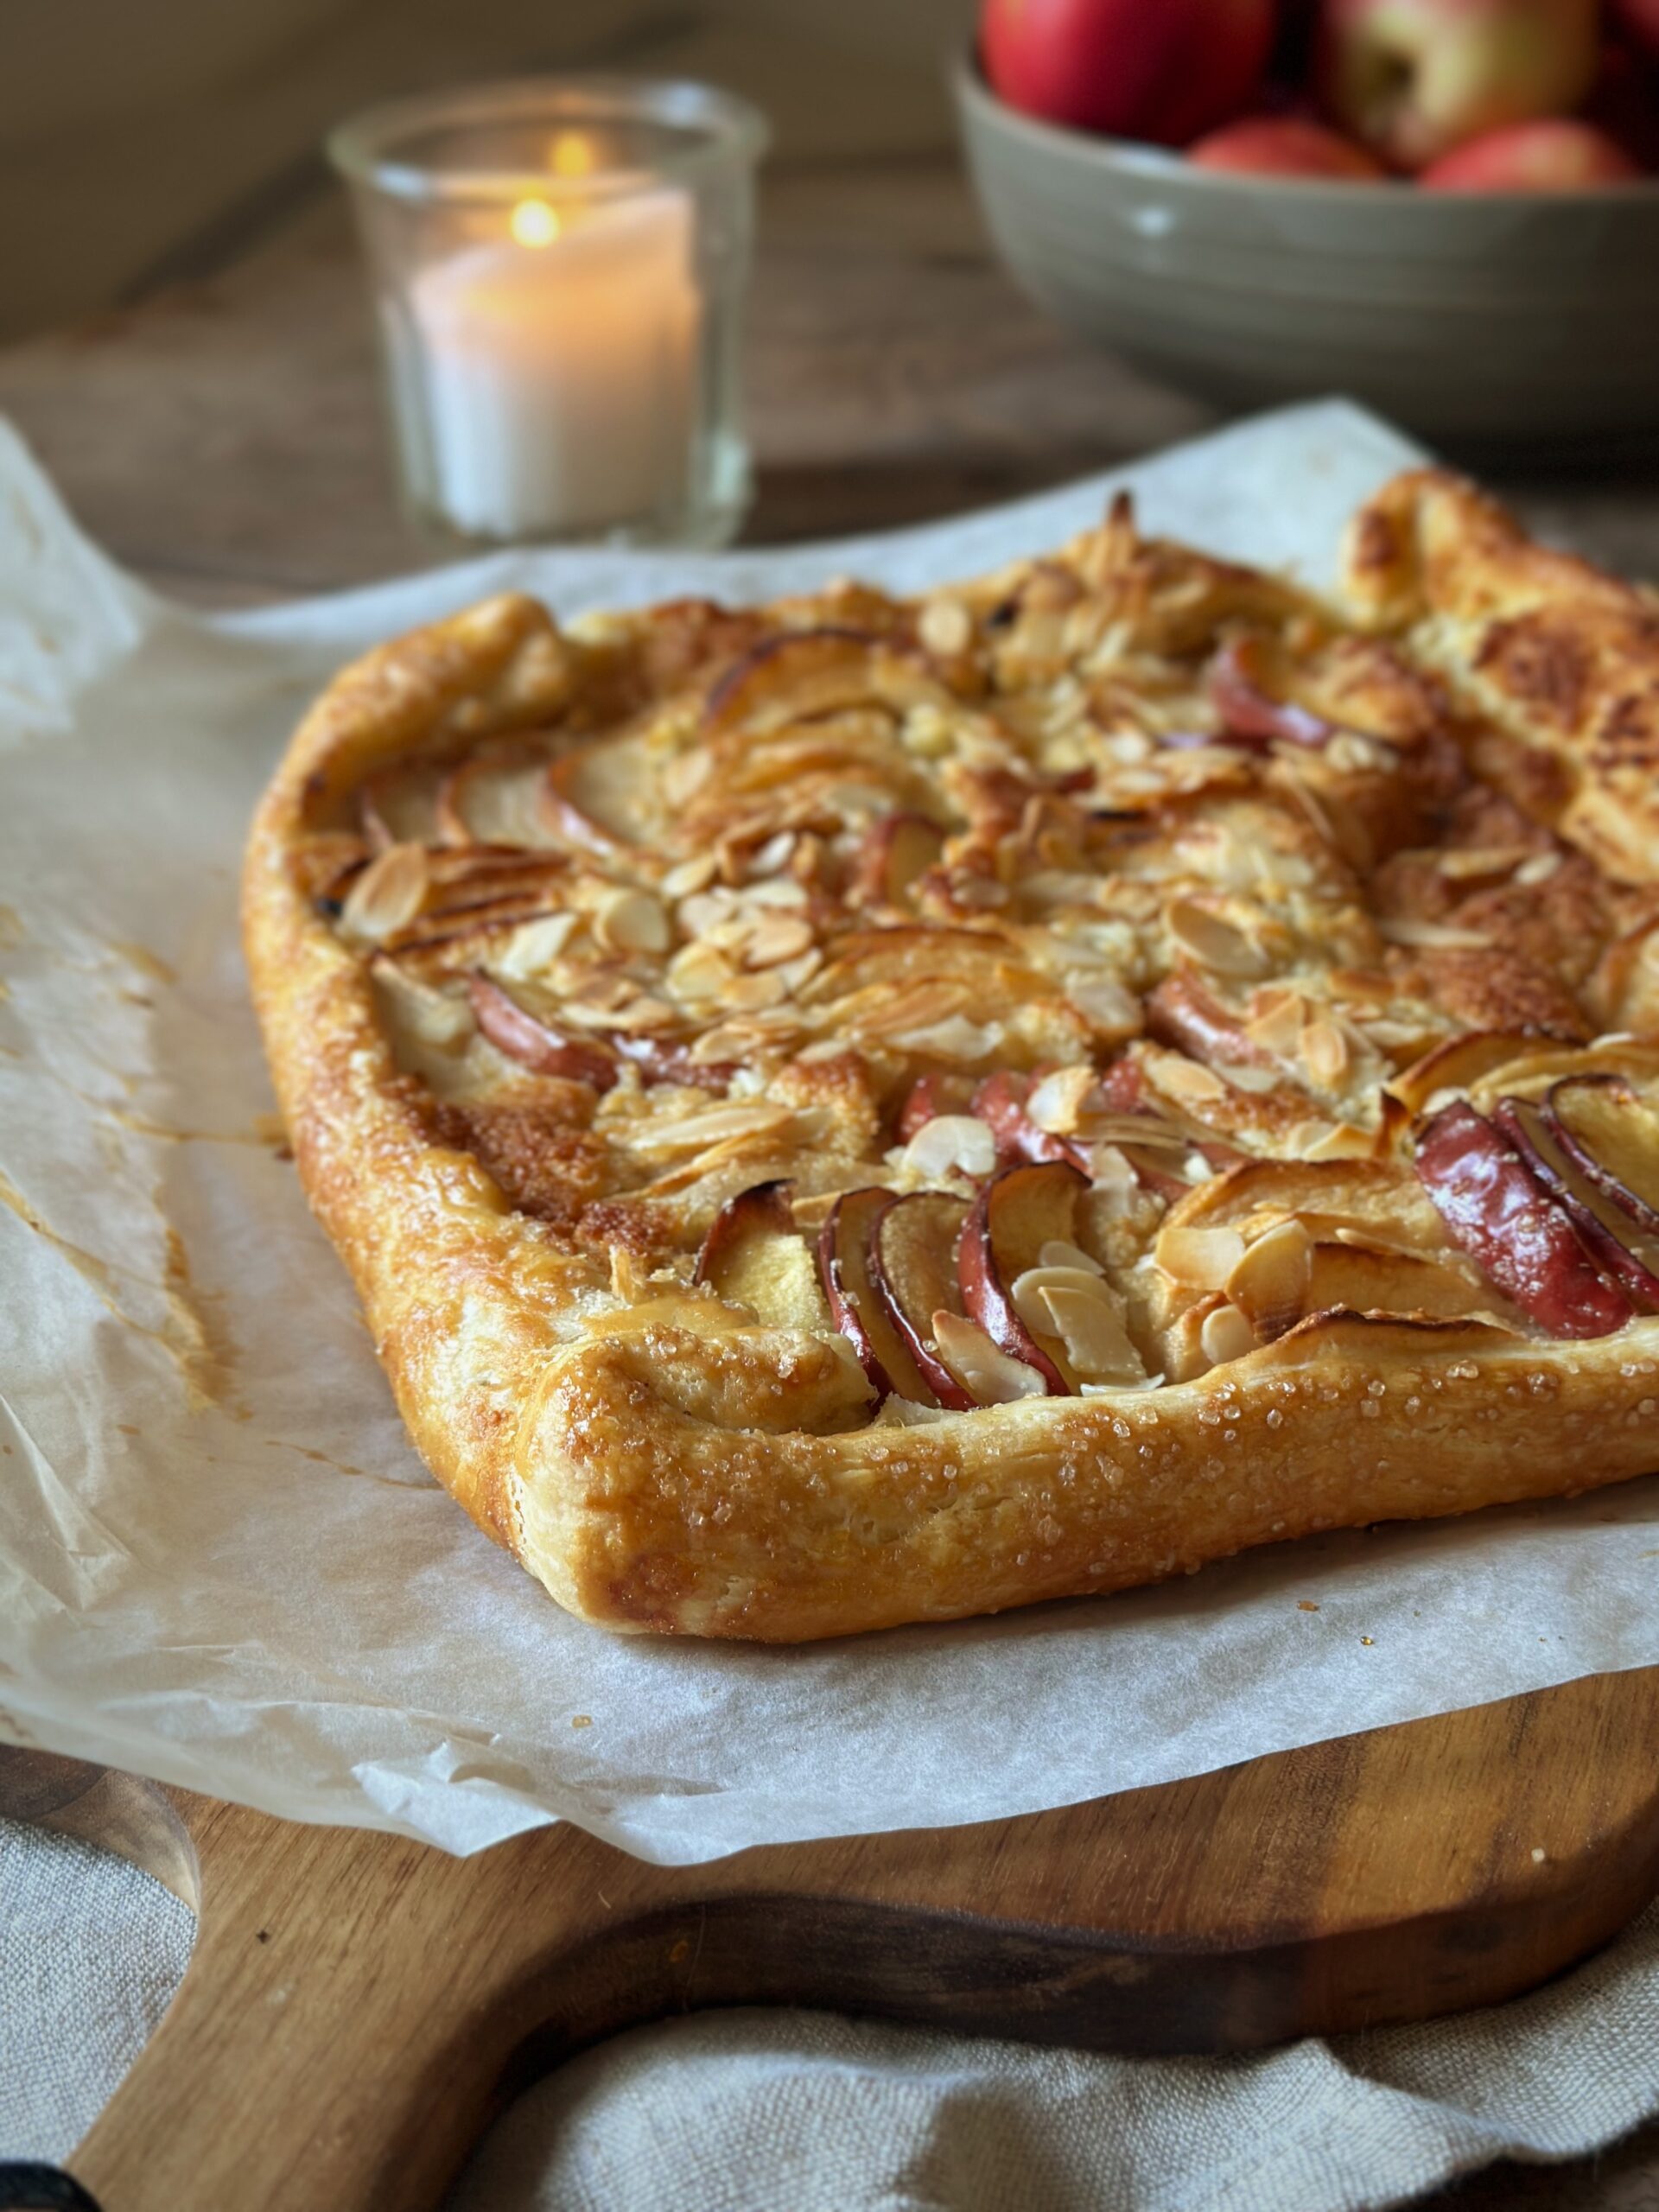 A rustic apple and almond galette, filled with an almondy frangipane and piled with sliced apples. The pastry is folded over on the edges to hold in the tart filling.